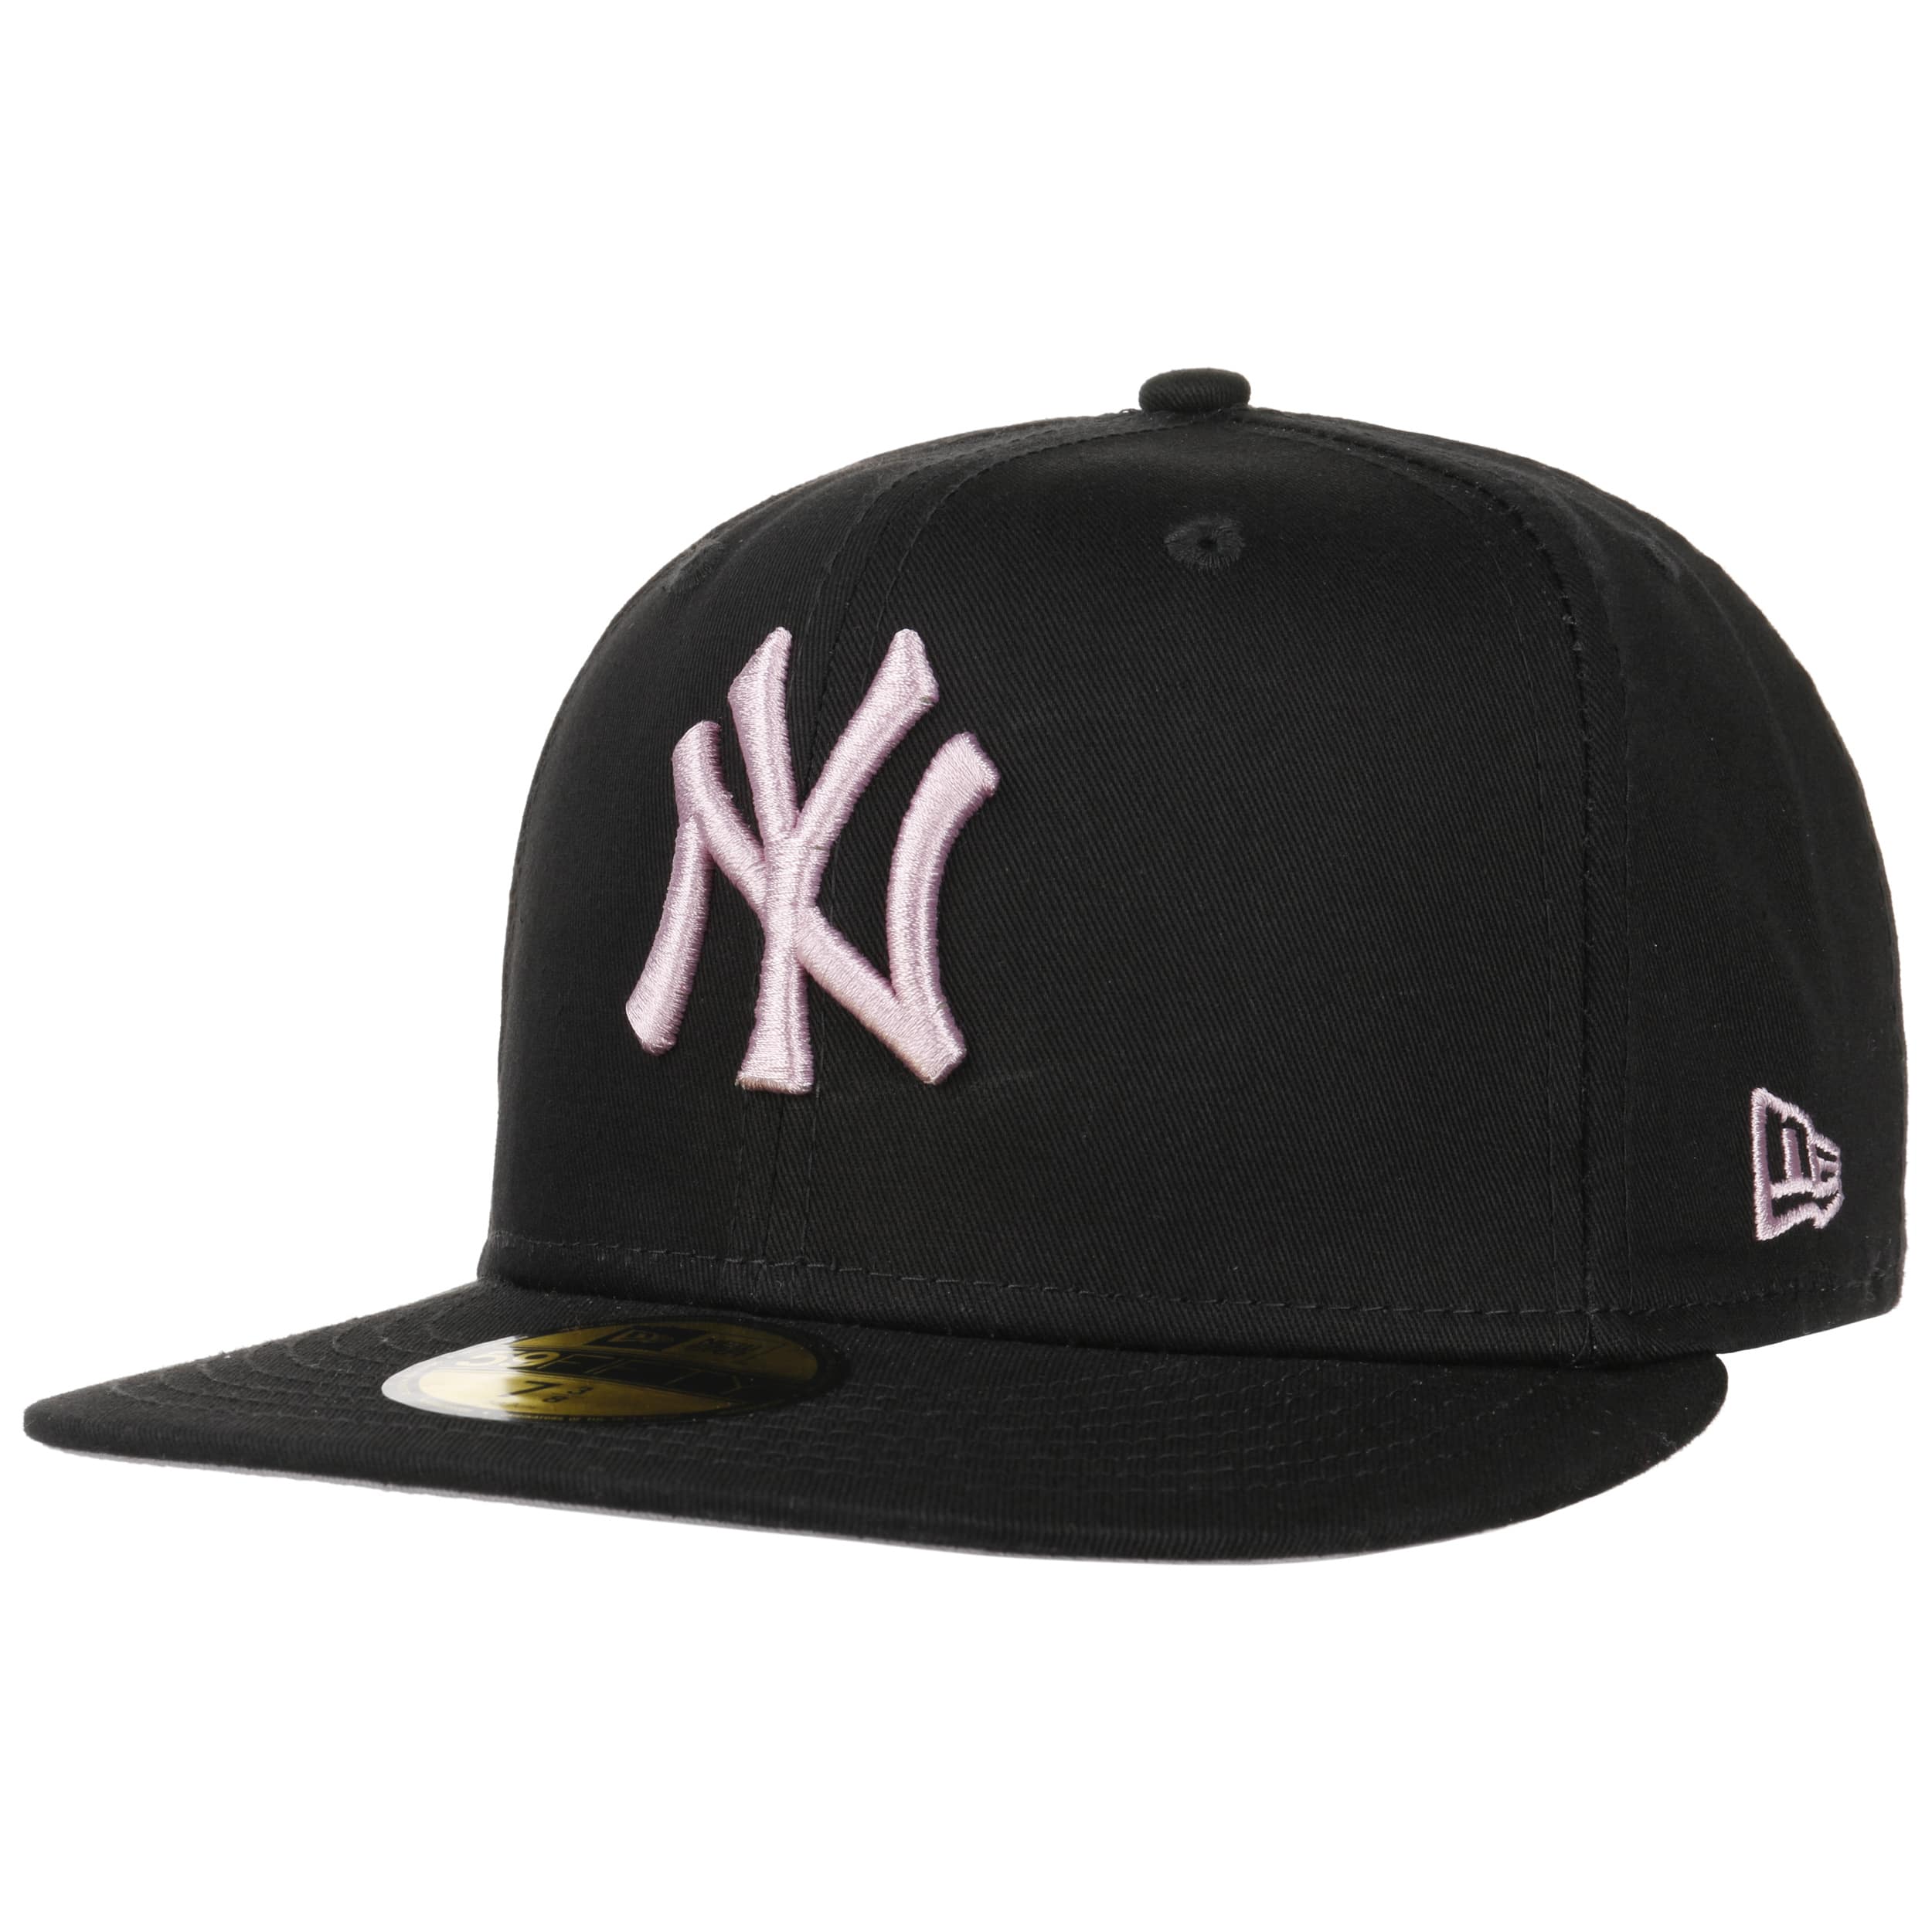 59Fifty Twotone Yankees Cap by 46,95 - € Era New